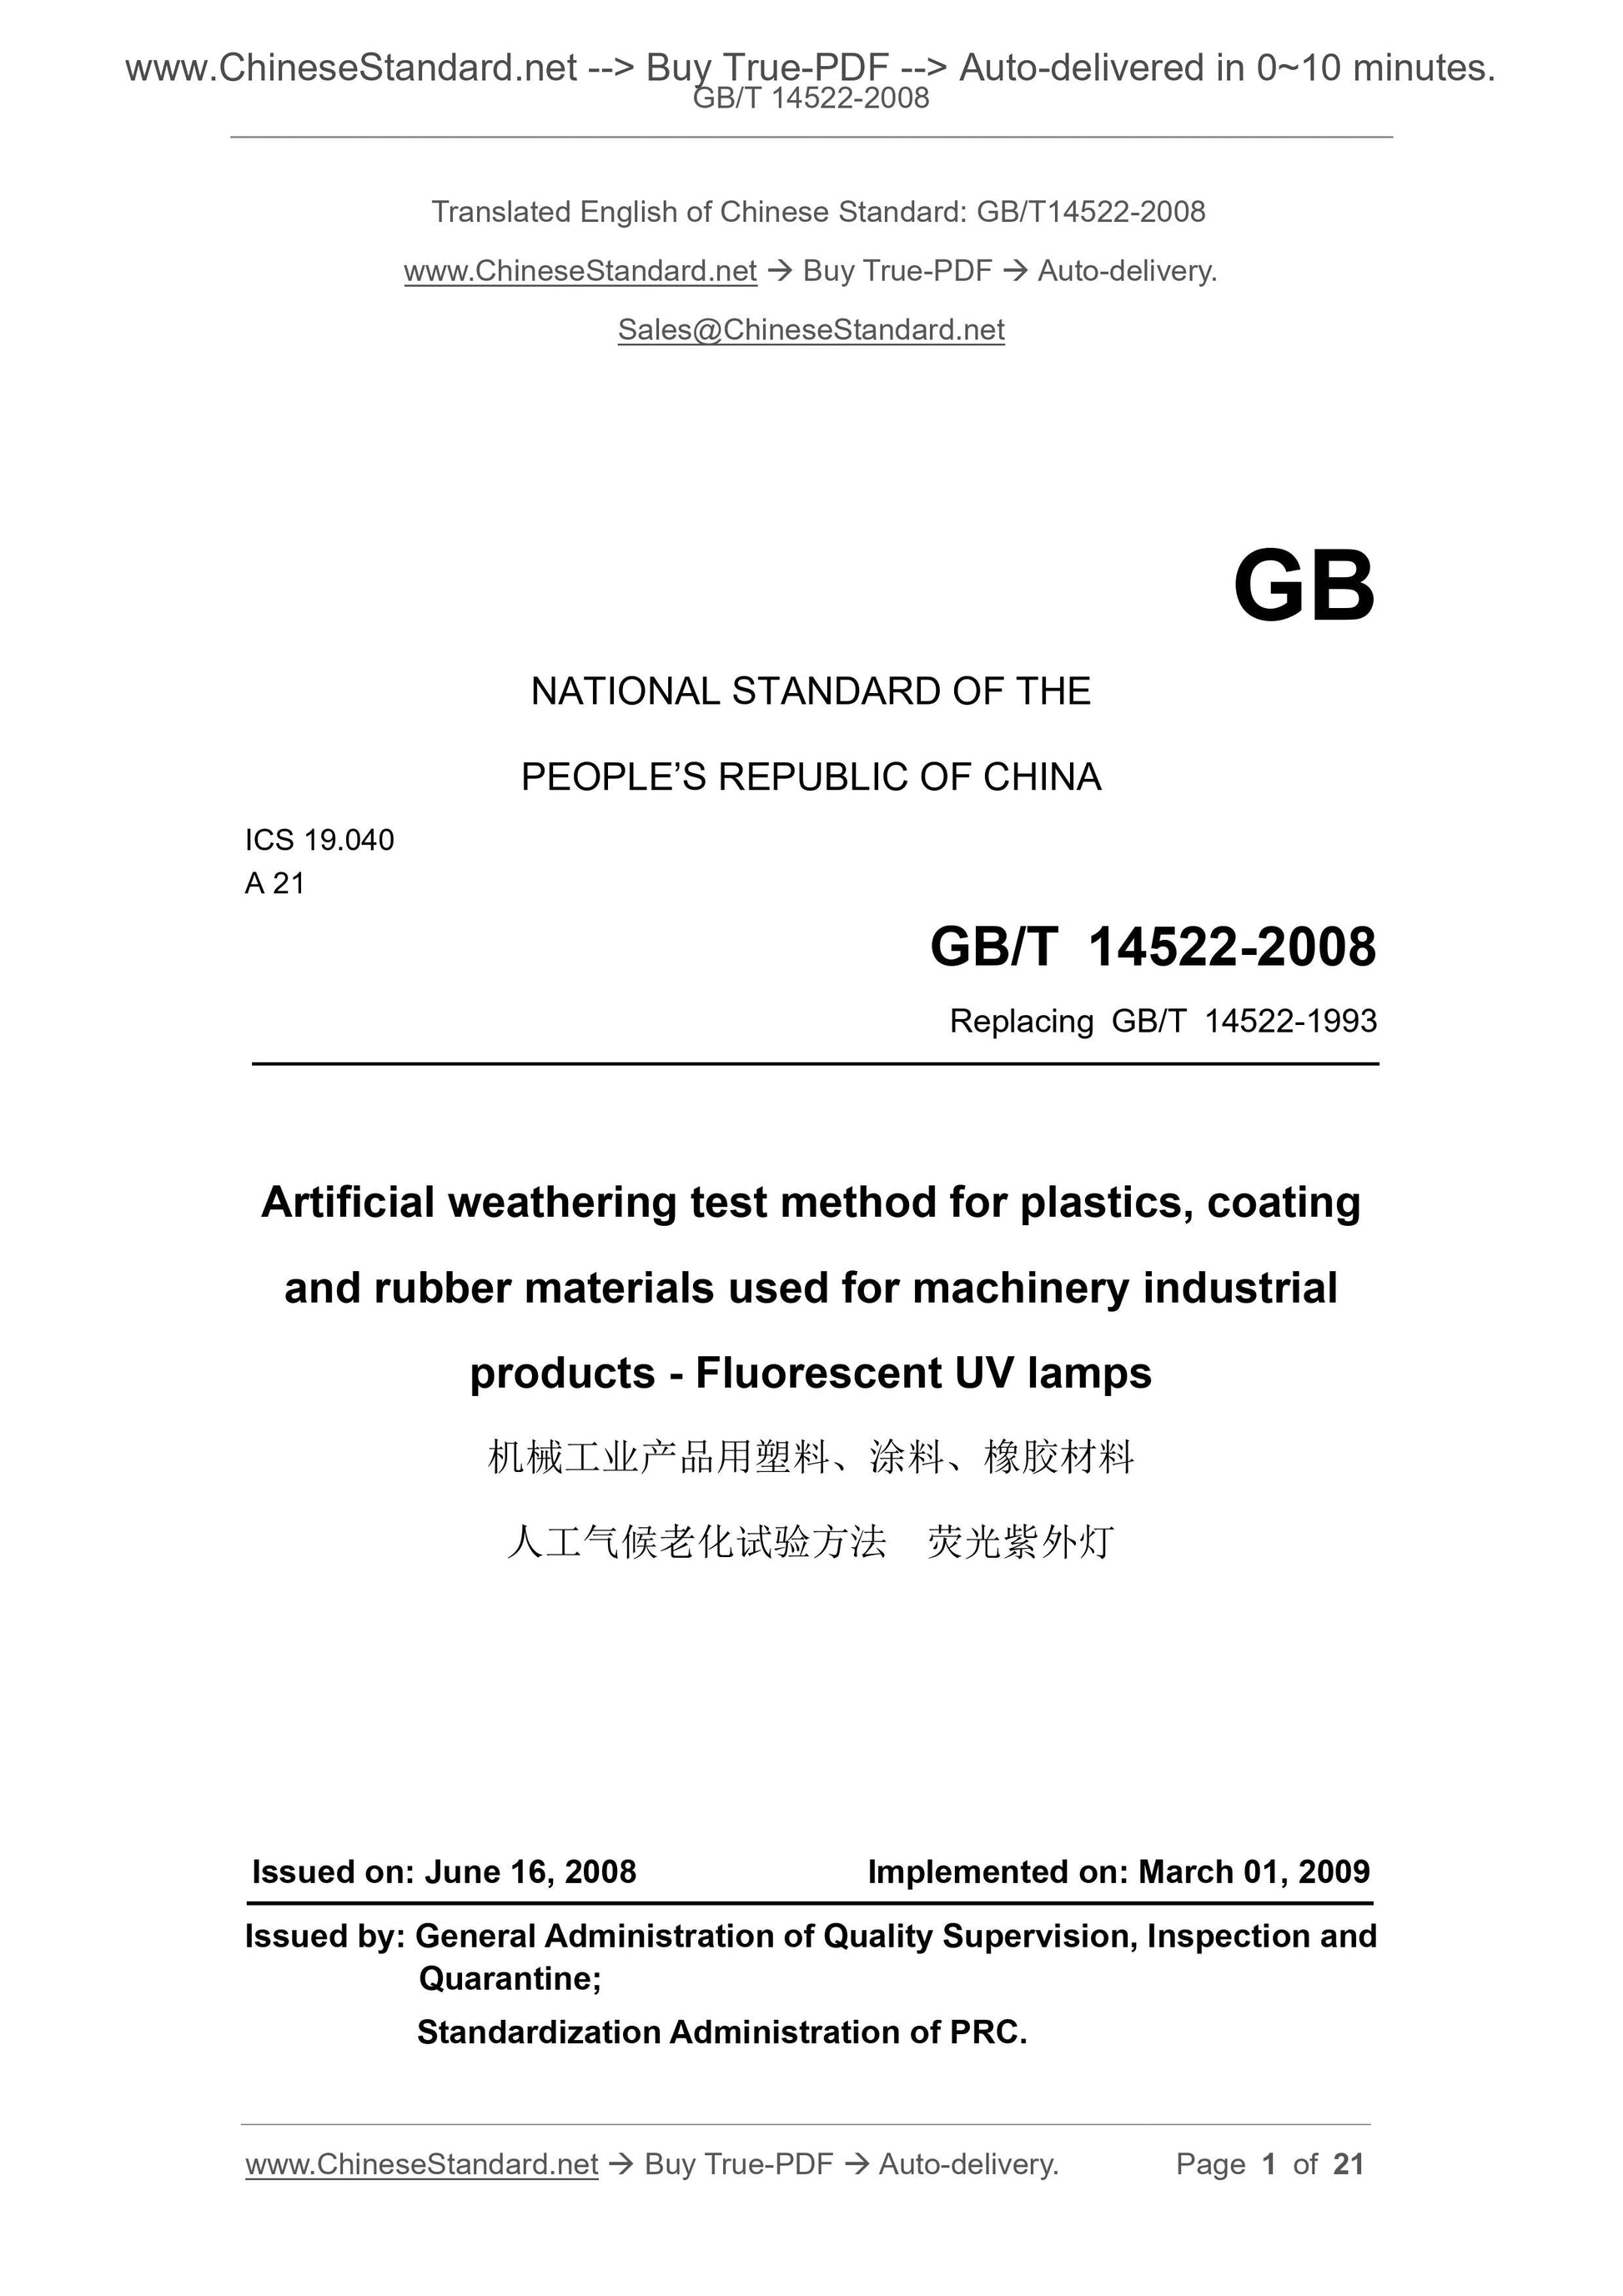 GB/T 14522-2008 Page 1